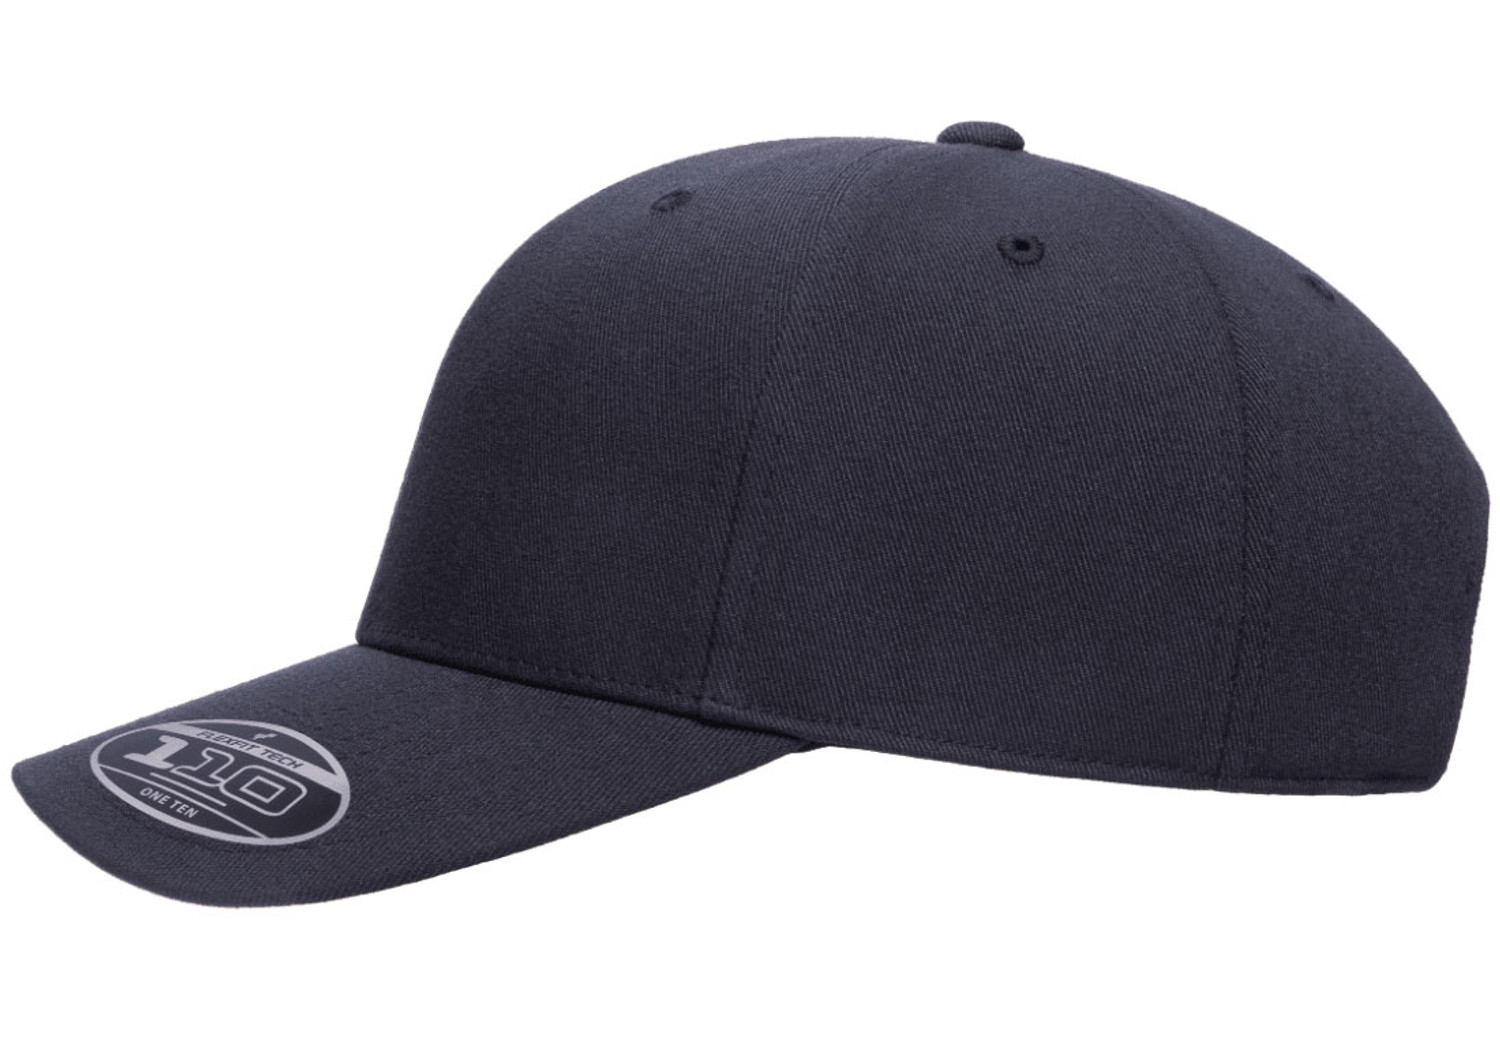 C937 Flexfit 110 Foam Outdoor Cap custom embroidered or printed with your  logo.